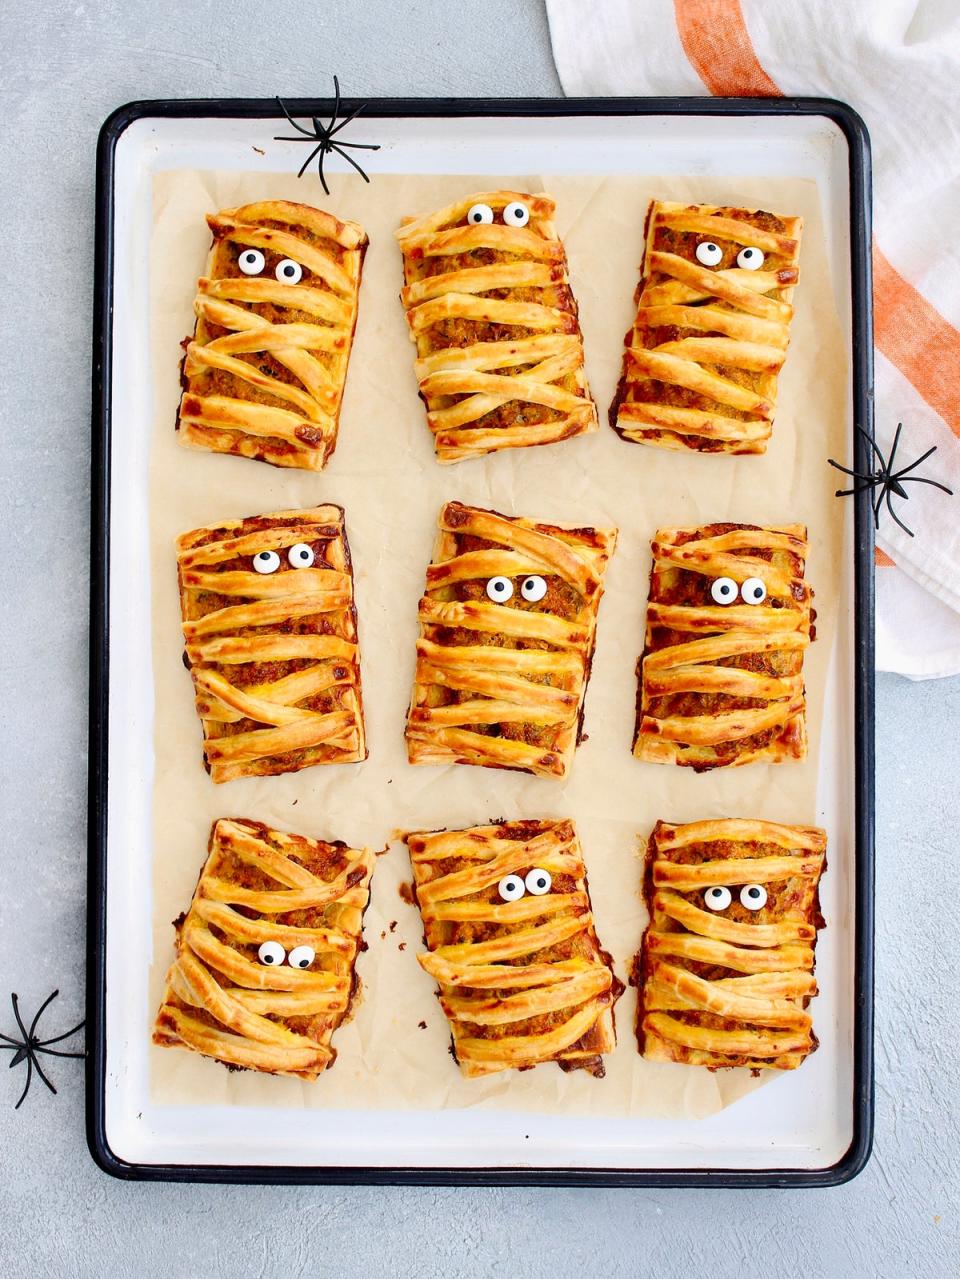 They won’t soon forget these mummy pies! (Easy Peasy Baking Campaign)